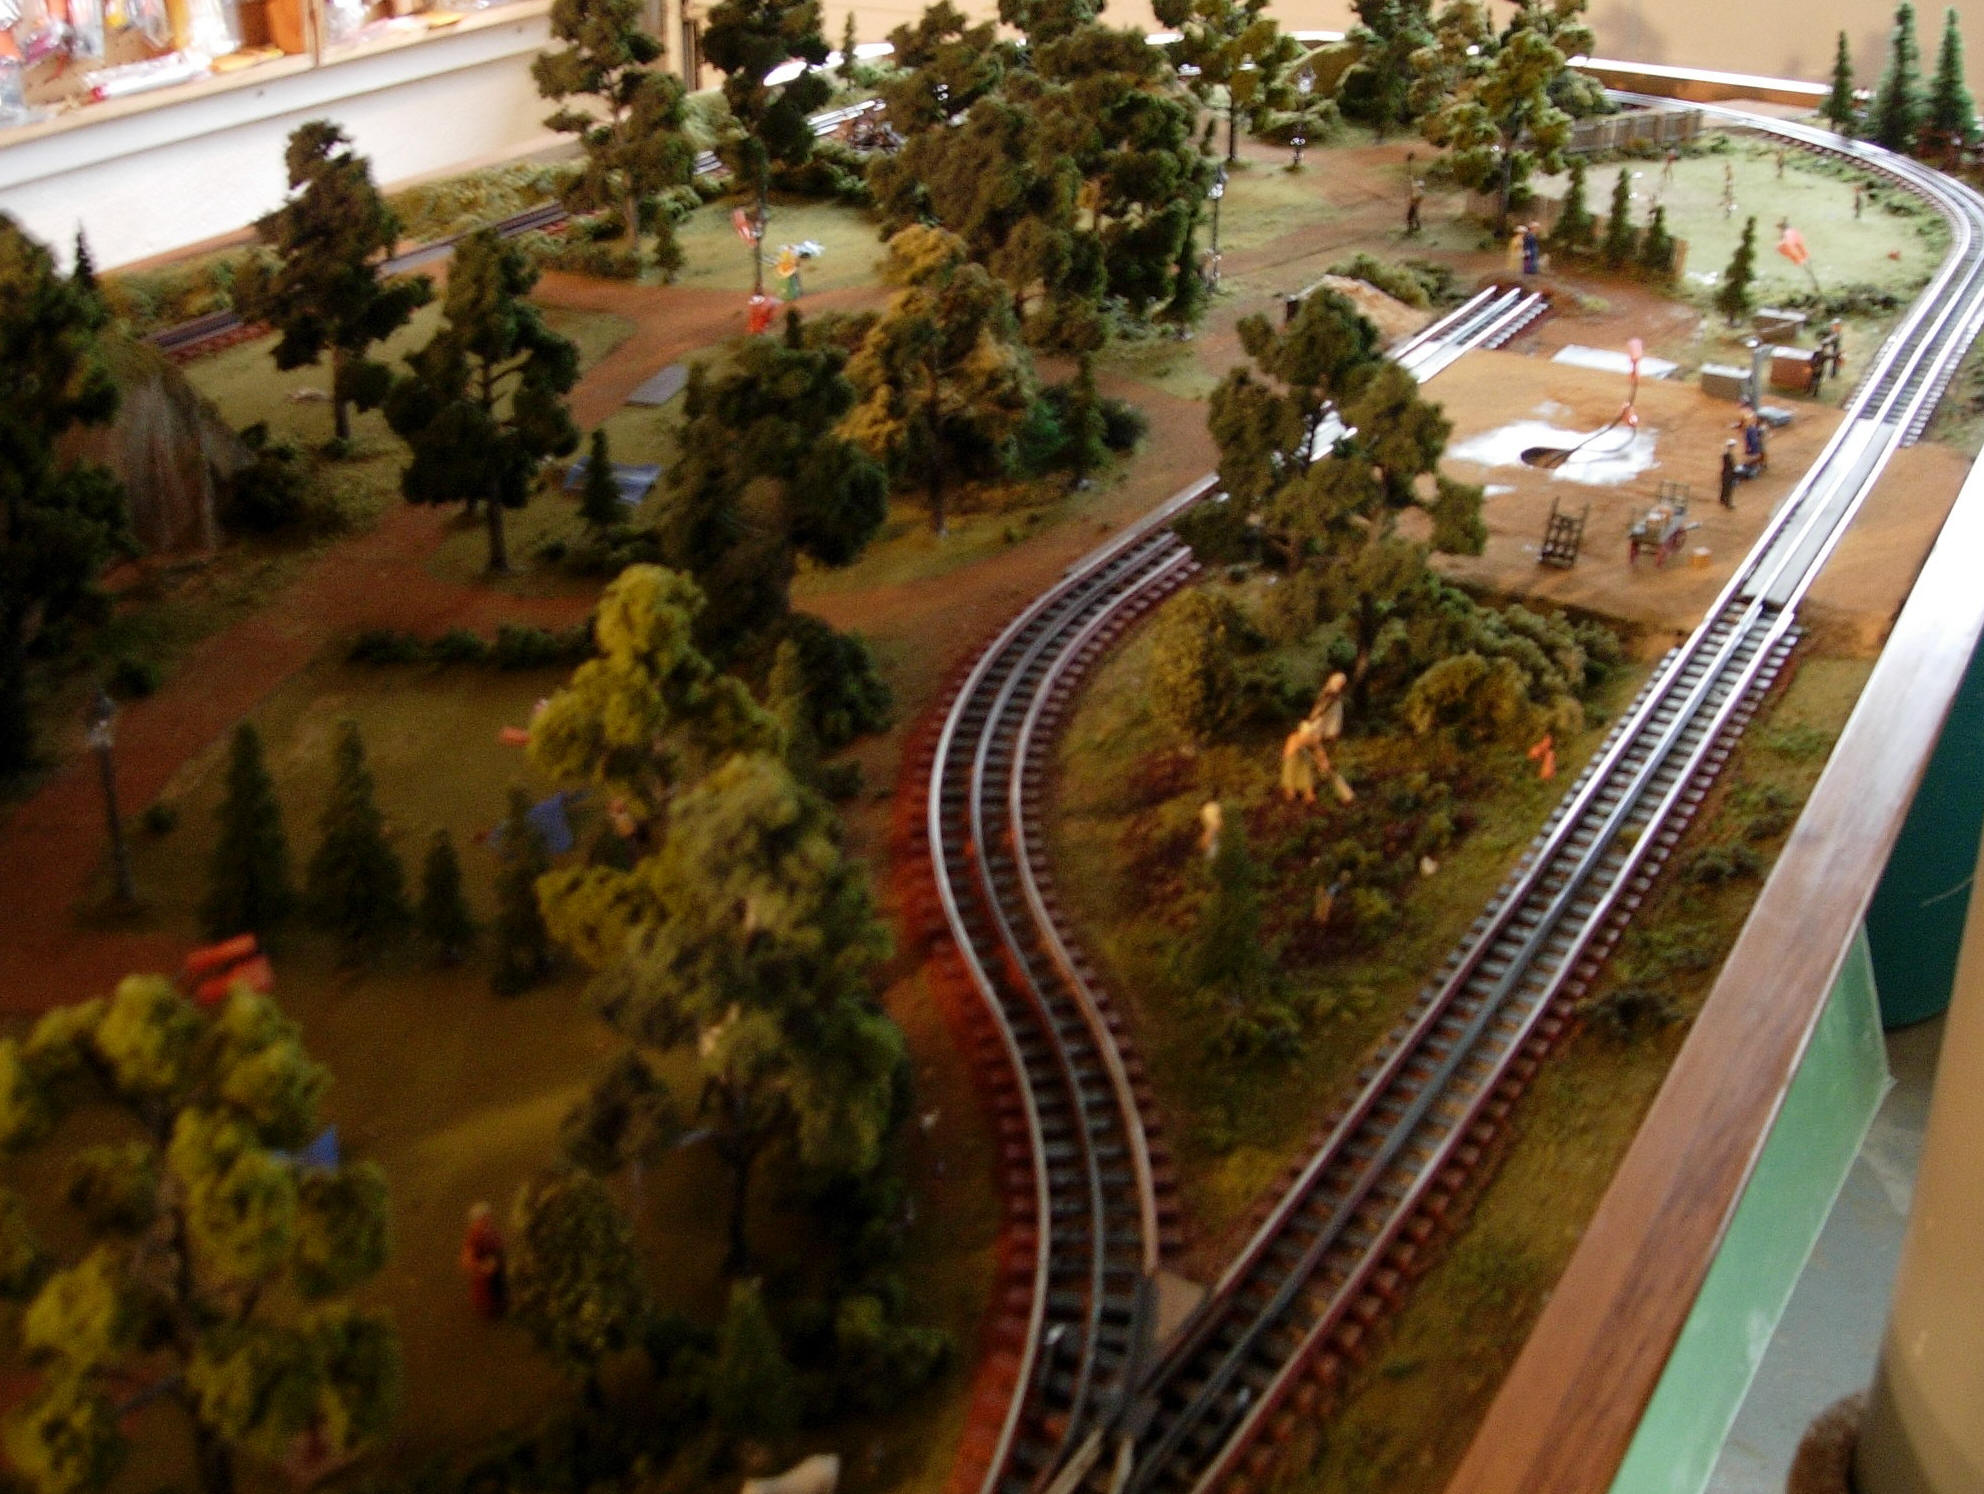 Train Layout Plans model railway back drops | Let The Dog In